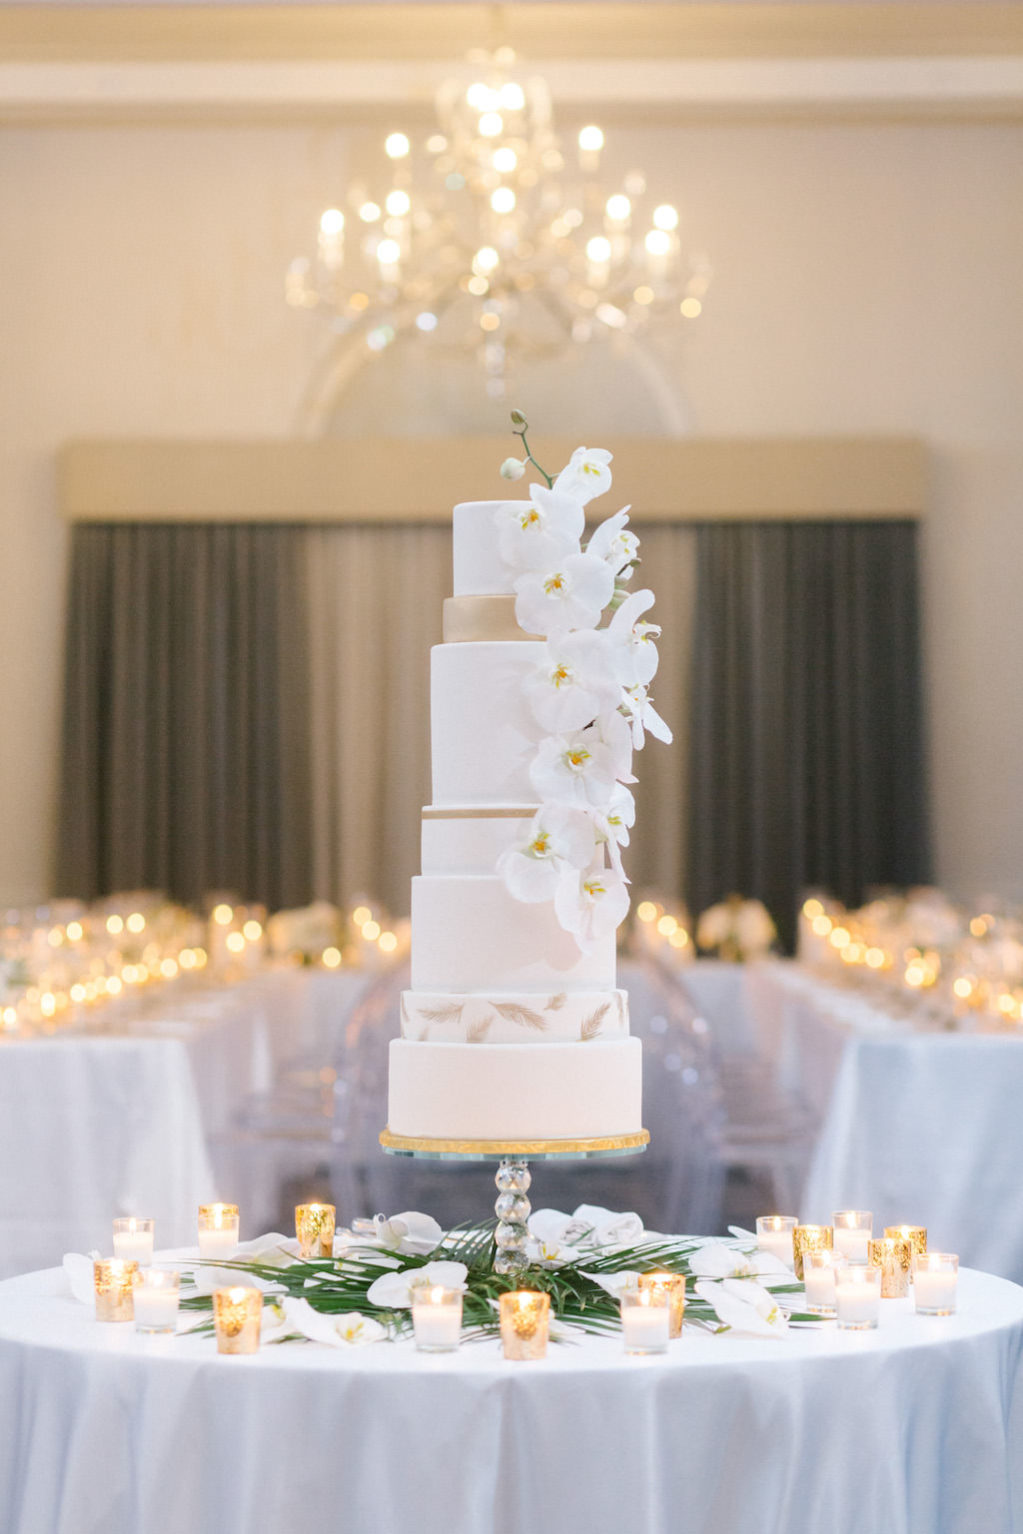 Elegant Classic Modern Seven Tier White and Gold Wedding Cake with Cascading White Real Orchid Flowers | Tampa Bay Wedding Baker The Artistic Whisk | Wedding Florist Bruce Wayne Florals | Wedding Rentals Kate Ryan Event Rentals